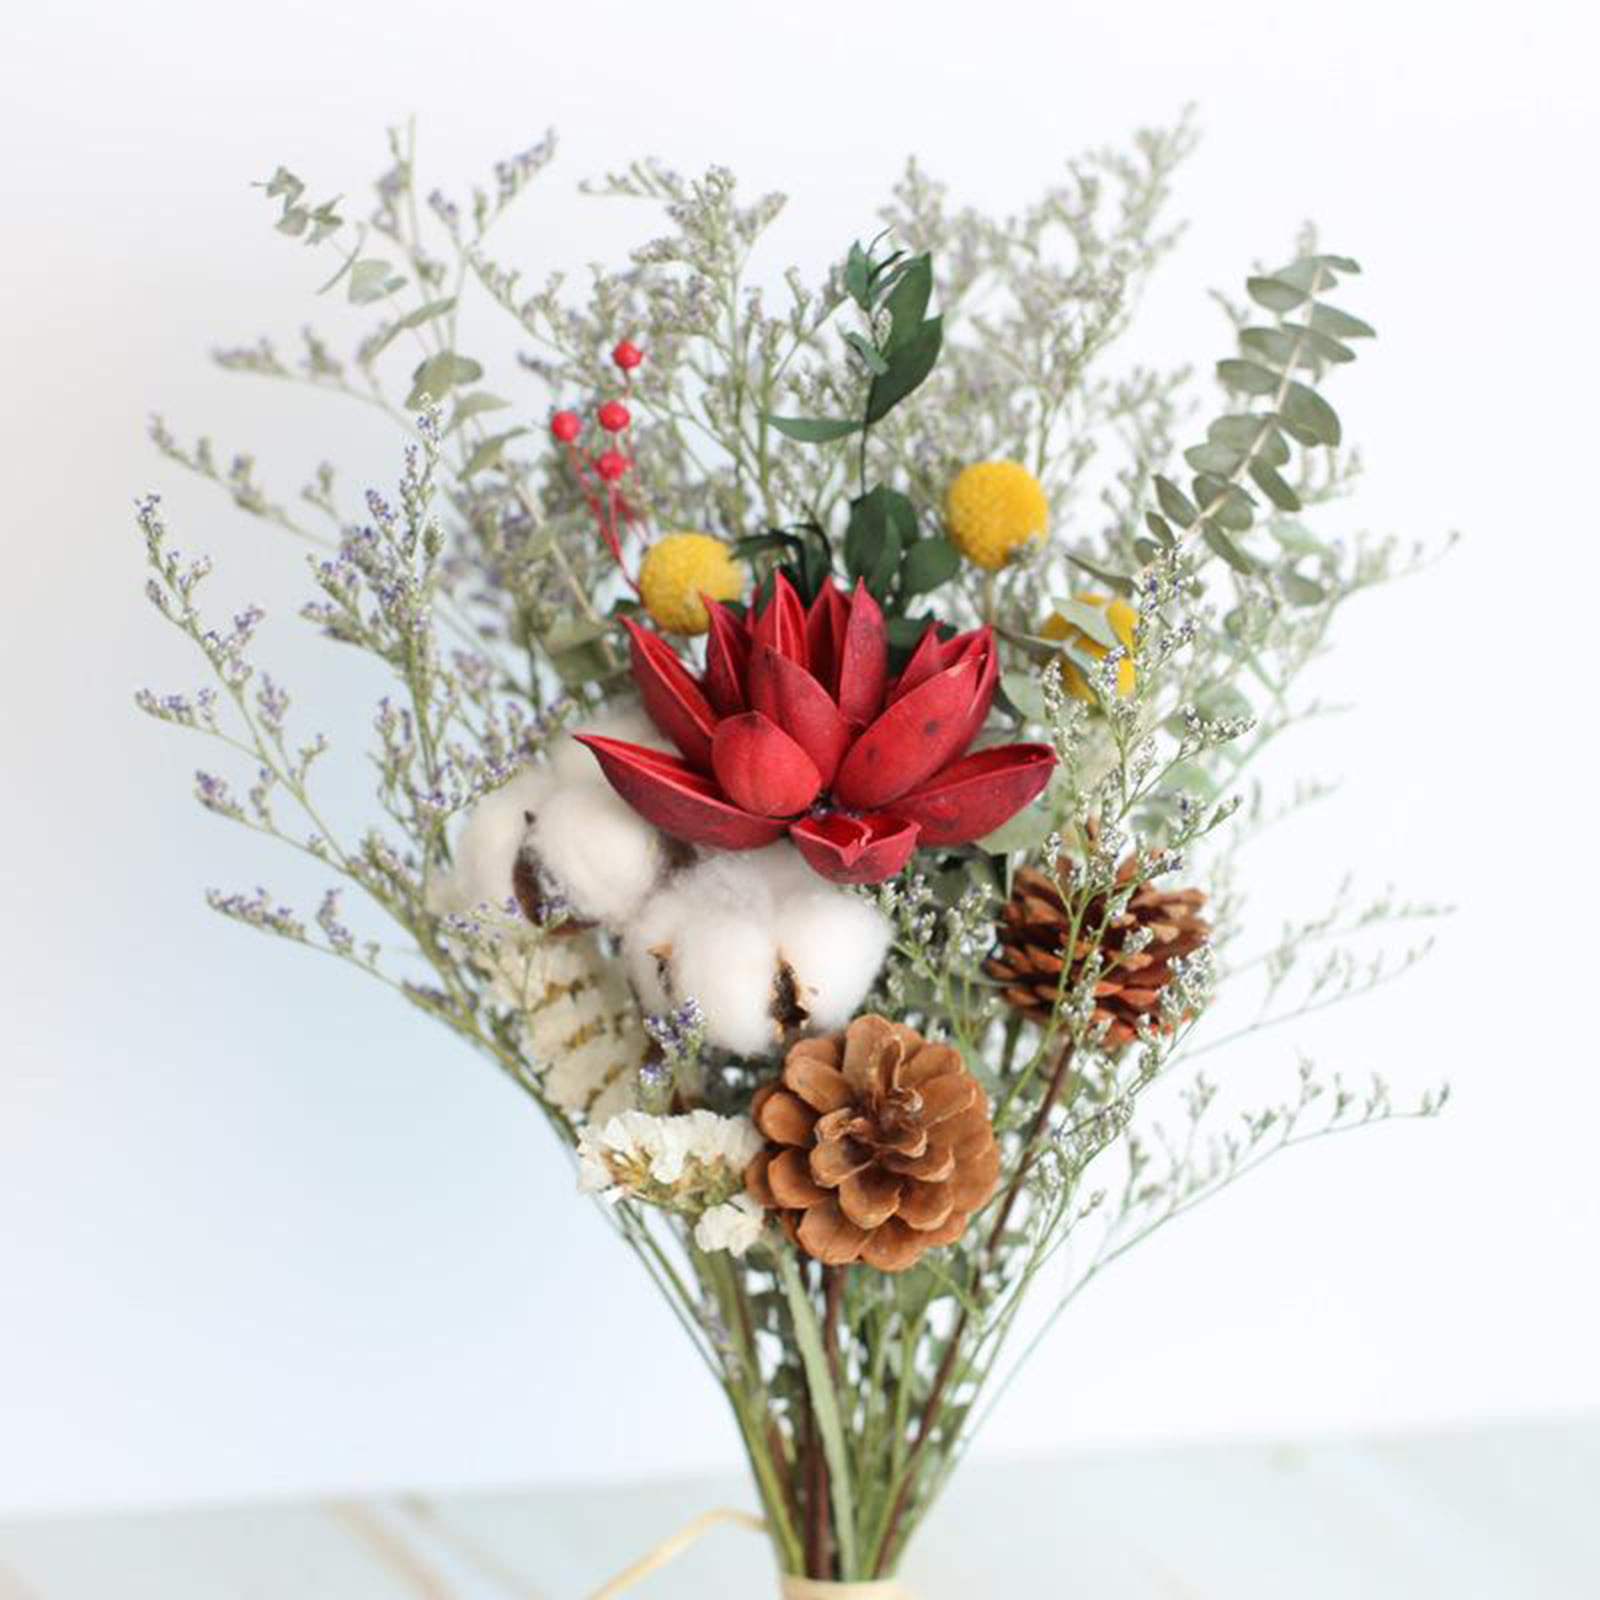 Natural Dried Flowers Arrangements - Dried Eucalyptus, Dried Baby's Breath,  Preserved Natural Limonium for Home Wedding Floral Decorations ( $ 19.99 )  For USA Testers DM me for more details : r/AMZreviewTrader